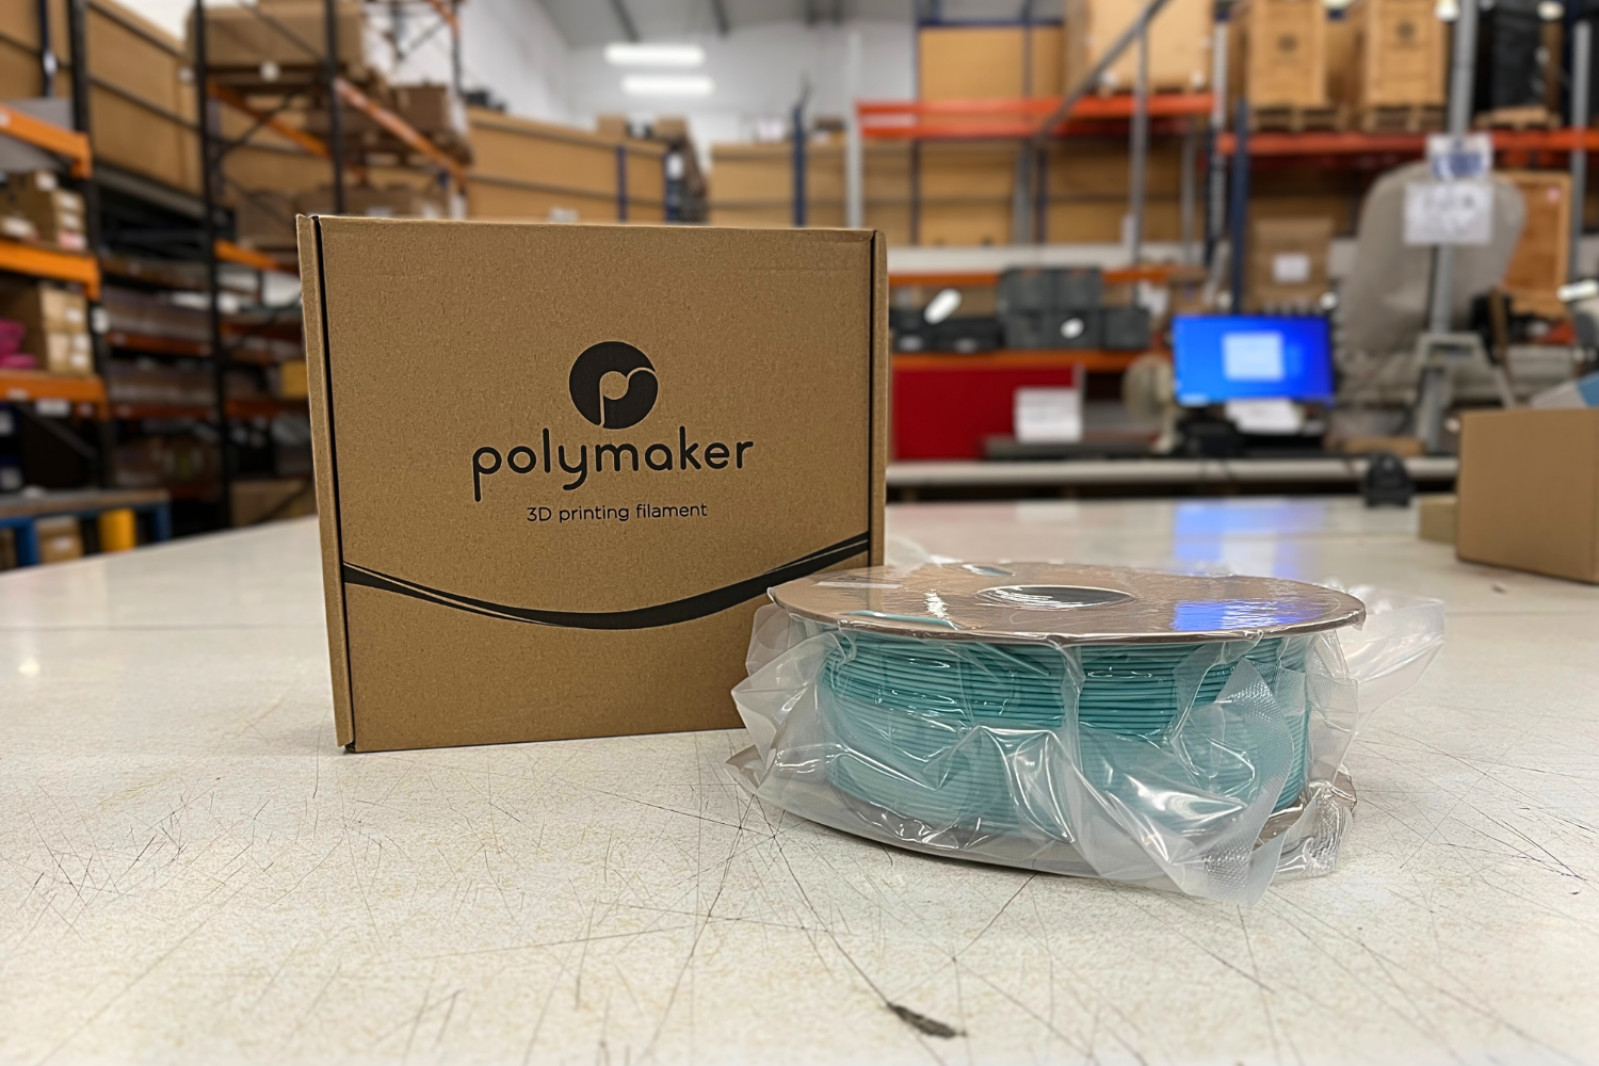 New Brand! Polymaker has arrived at Additive-X